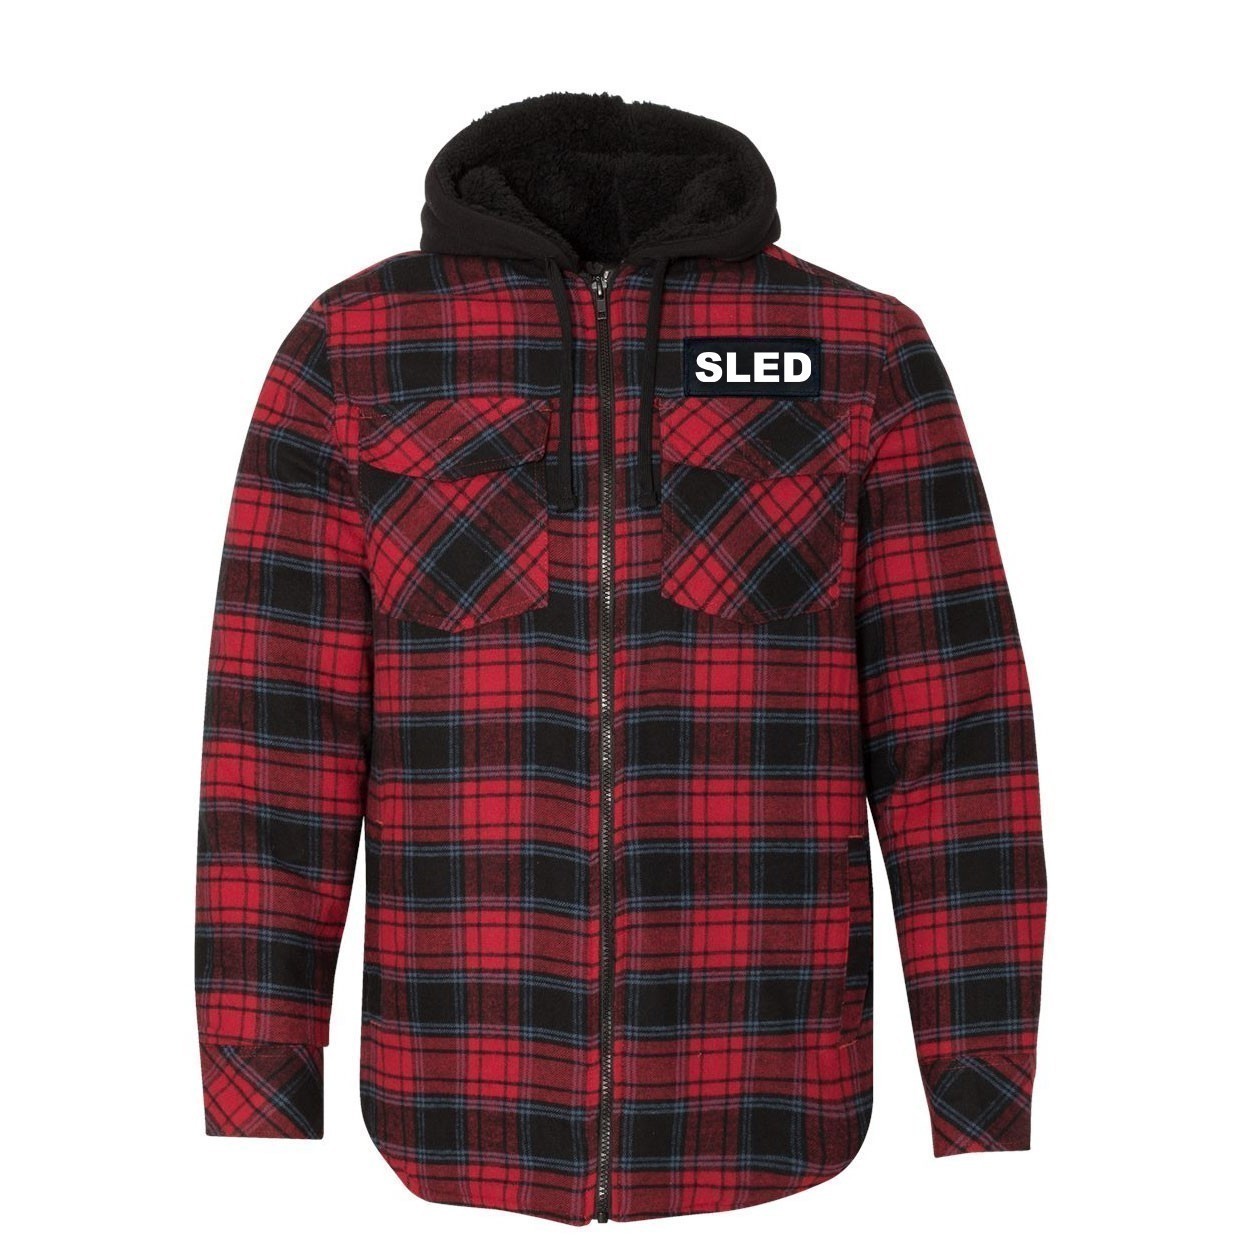 Sled Brand Logo Classic Unisex Full Zip Woven Patch Hooded Flannel Jacket Red/Black Buffalo